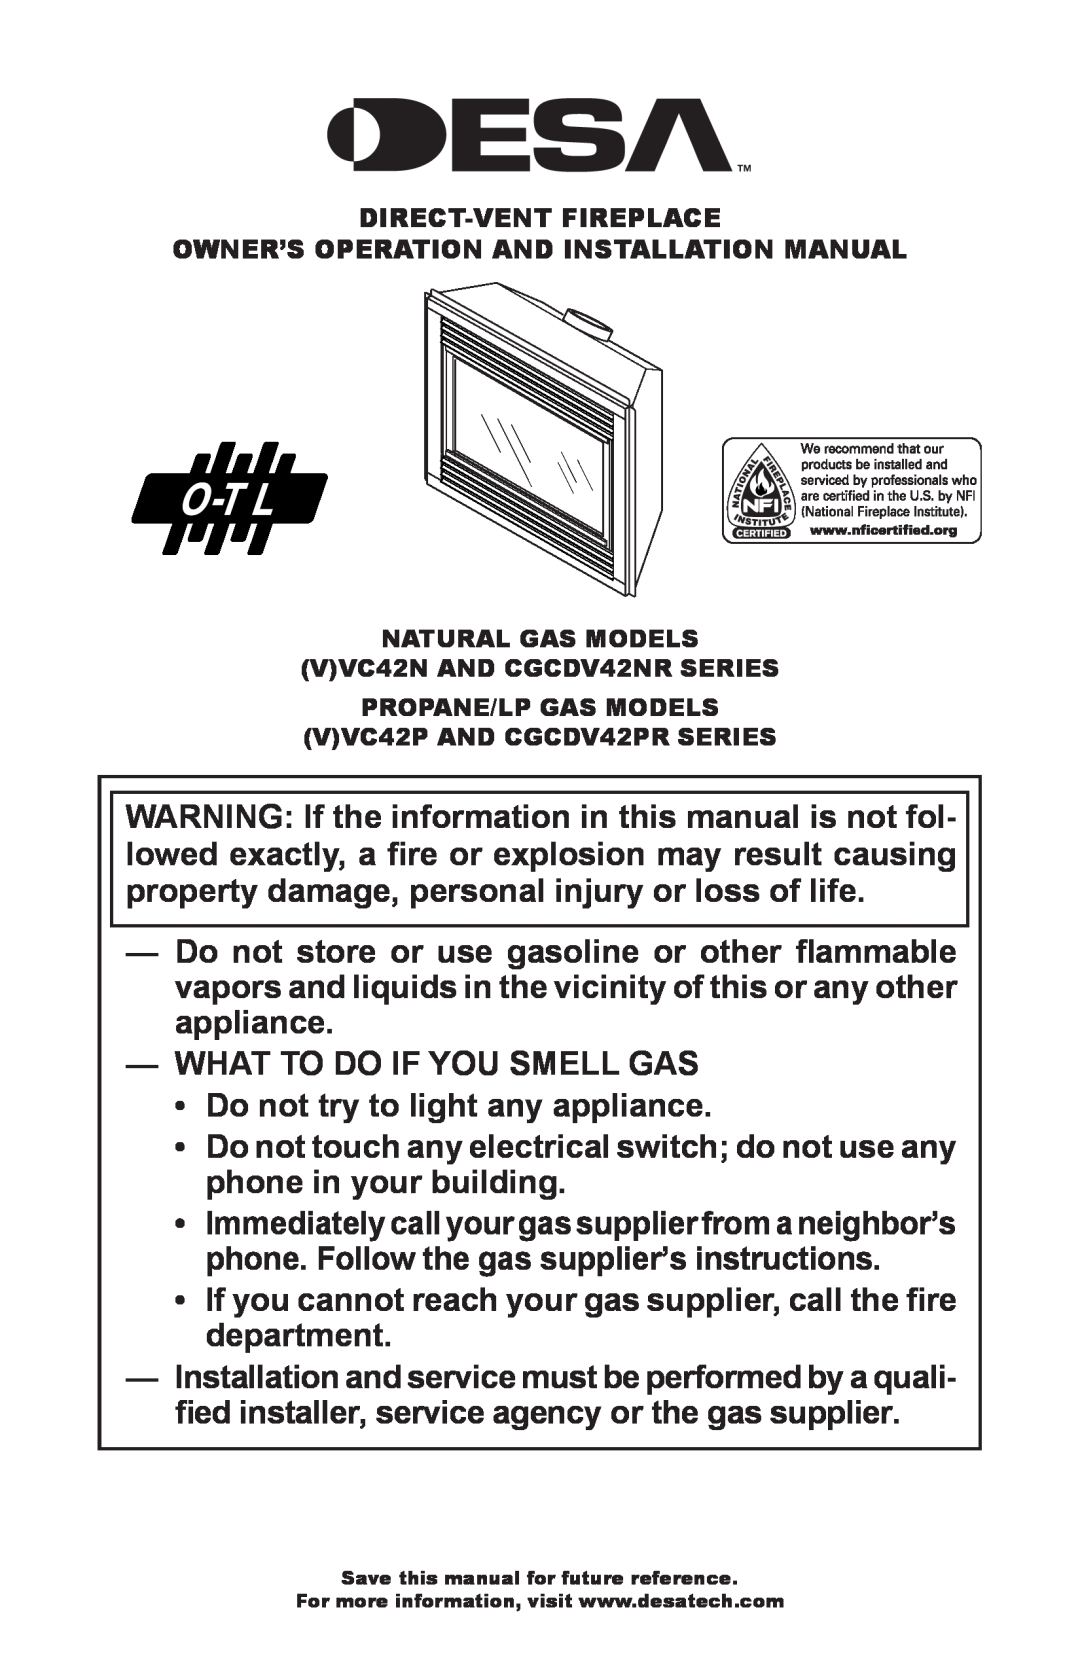 Desa VC42N, CGCDV42NR, VC42P, CGCDV42PR, (V)VC42P, CGCDV42PR installation manual What To Do If You Smell Gas 